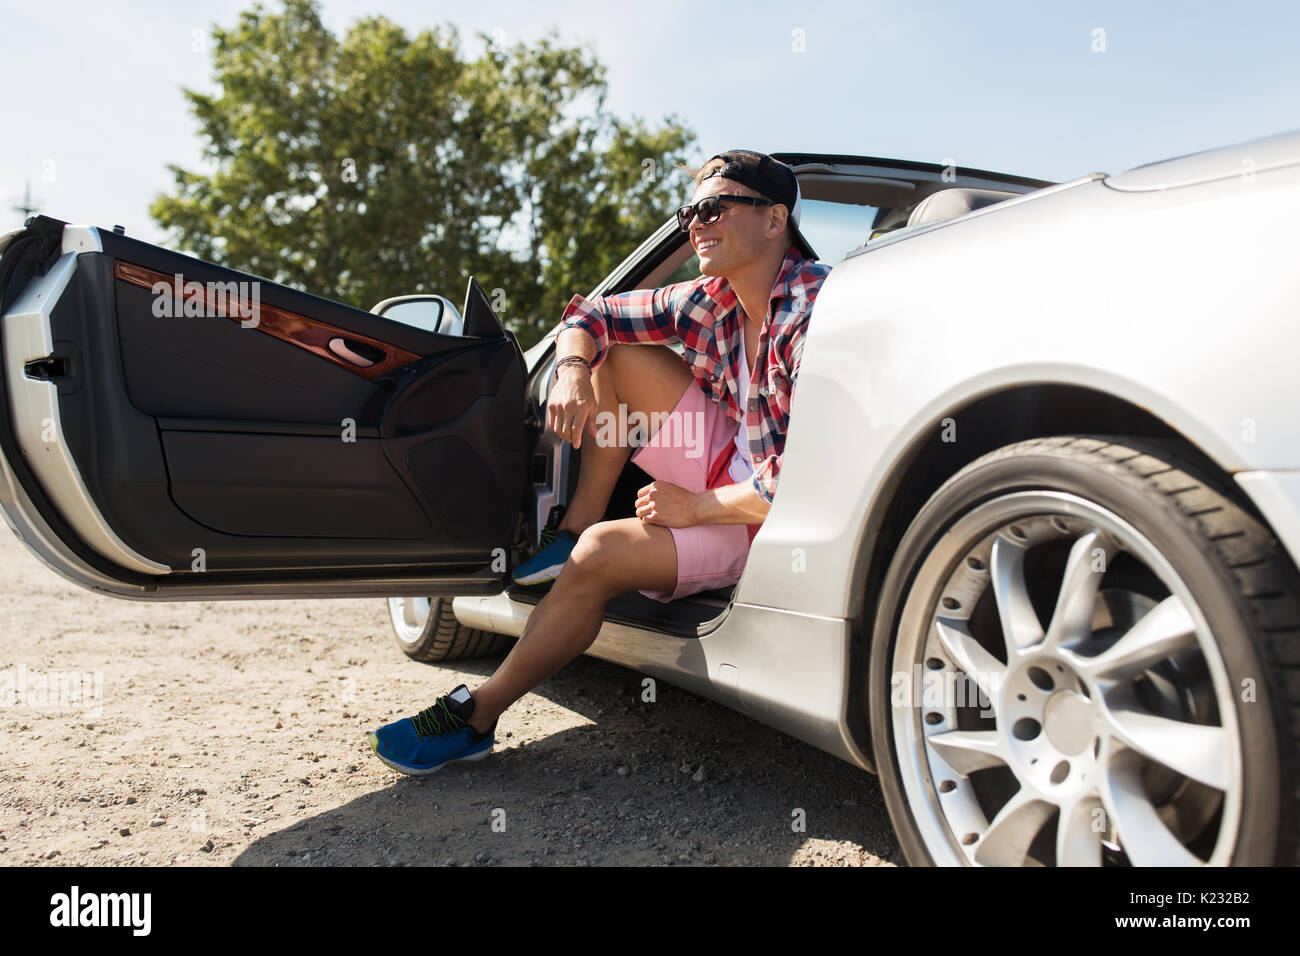 Happy young man sitting in convertible car Banque D'Images